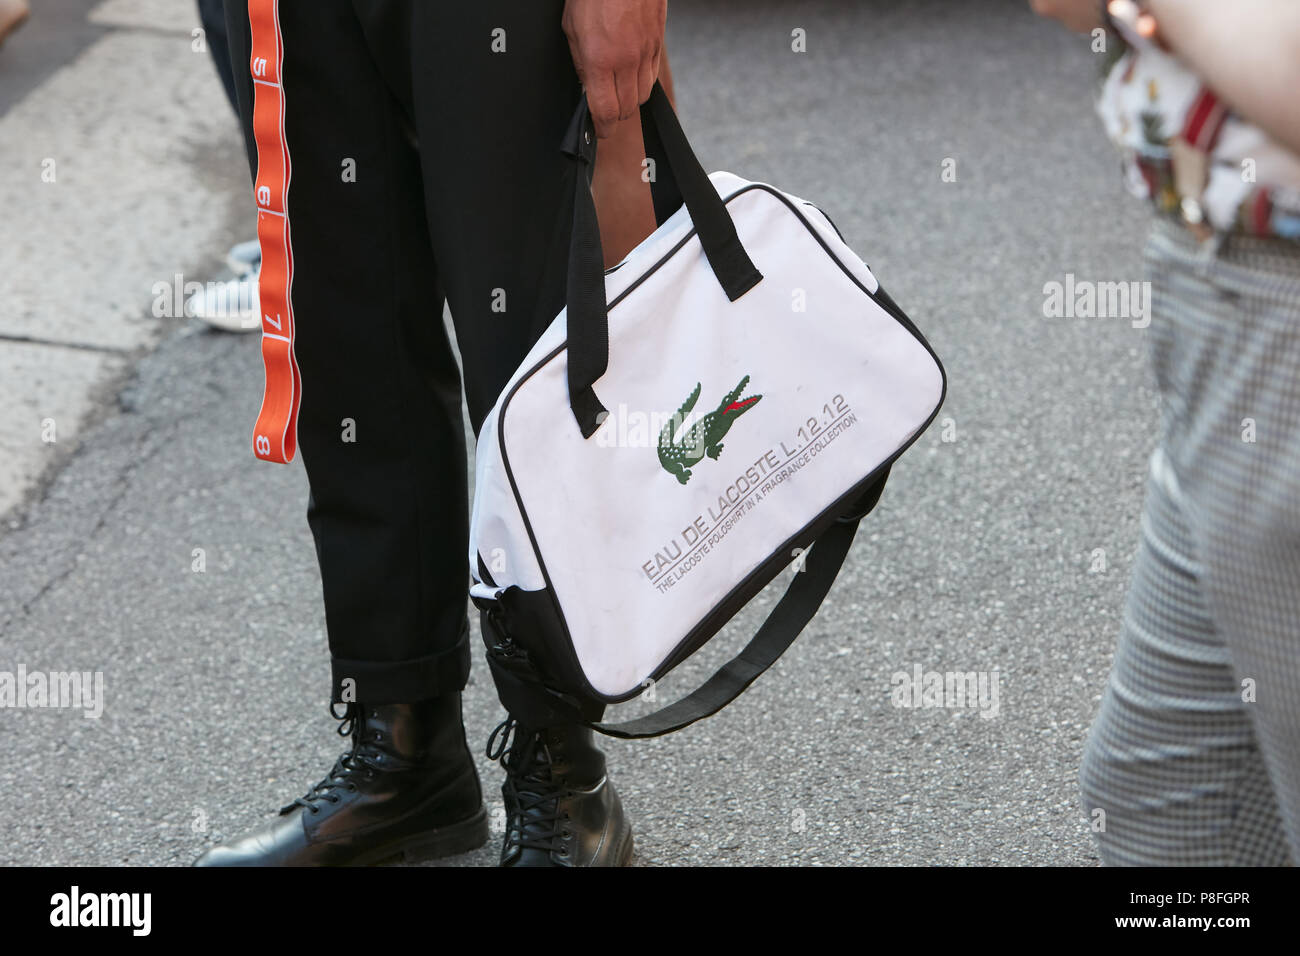 Man with white and black Lacoste bag 